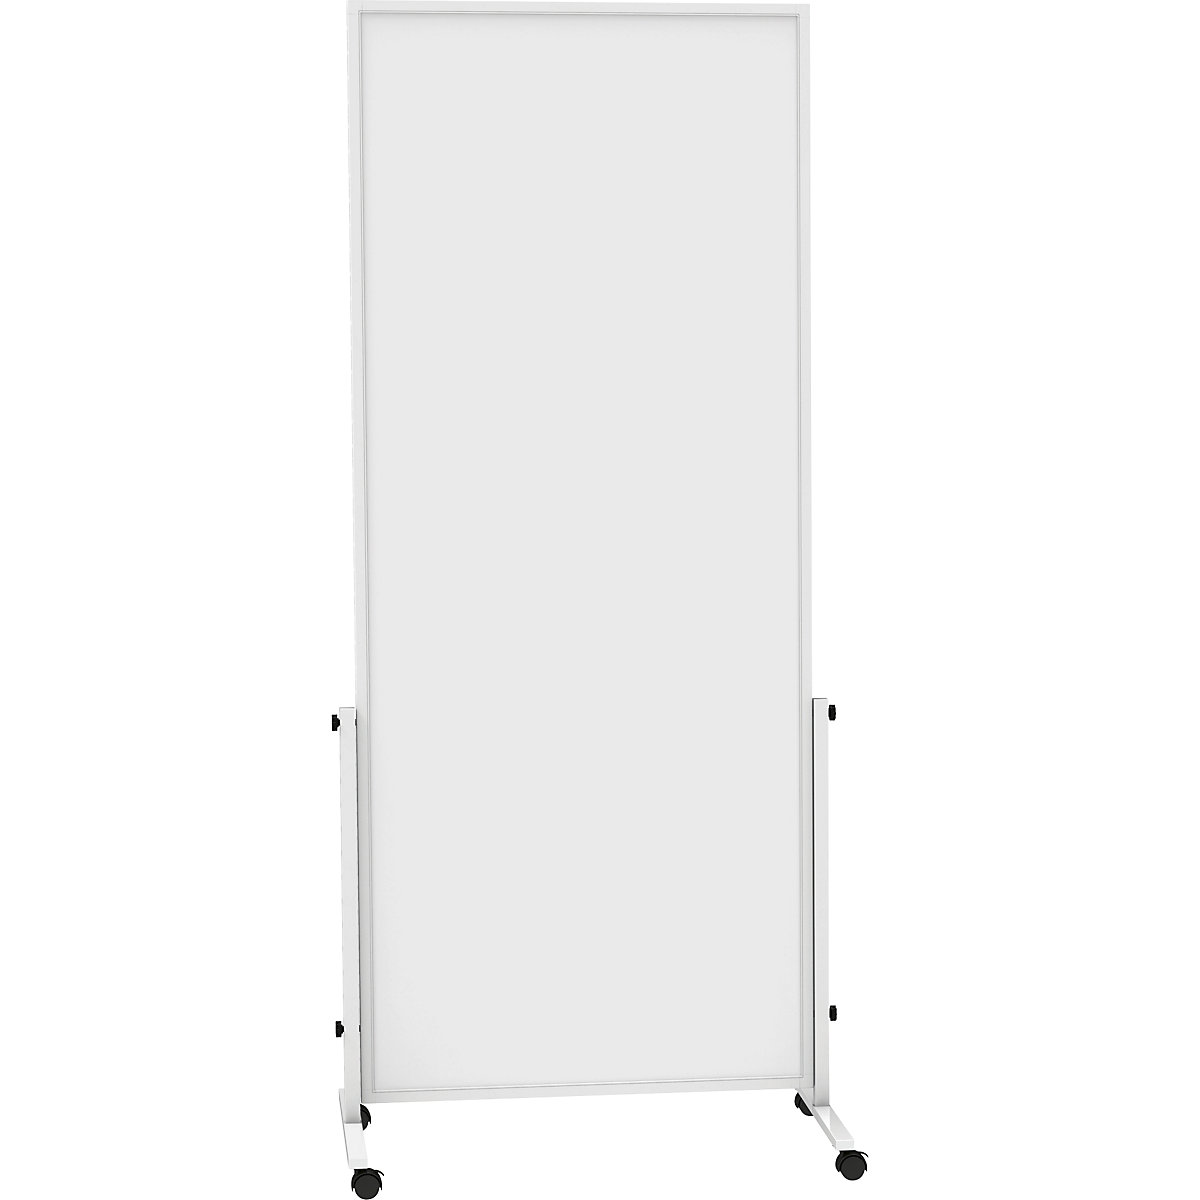 Whiteboard MAUL®solid easy2move, mobil MAUL